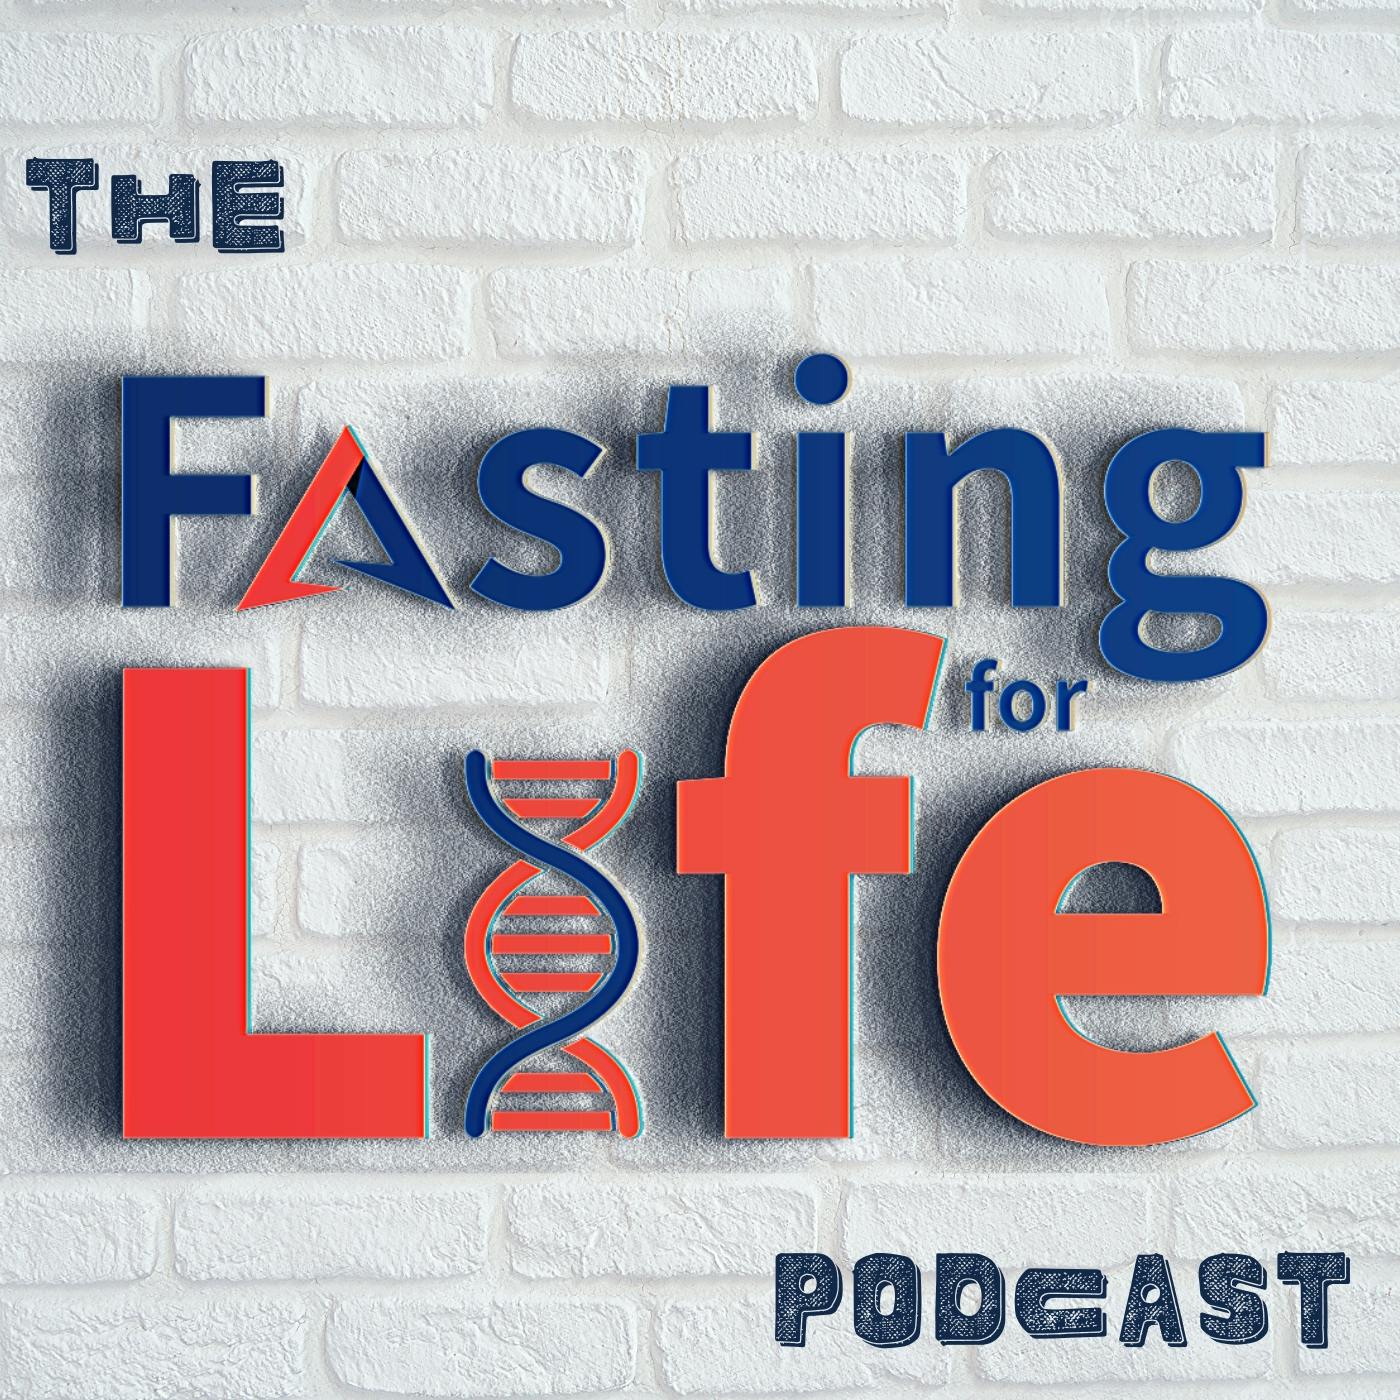 Ep. 175 - How daily eating patterns impact weight, health & disease | Timing your fasting & circadian rhythms to burn fat & optimize health | Do early or late calories differ? | CGM data improves your